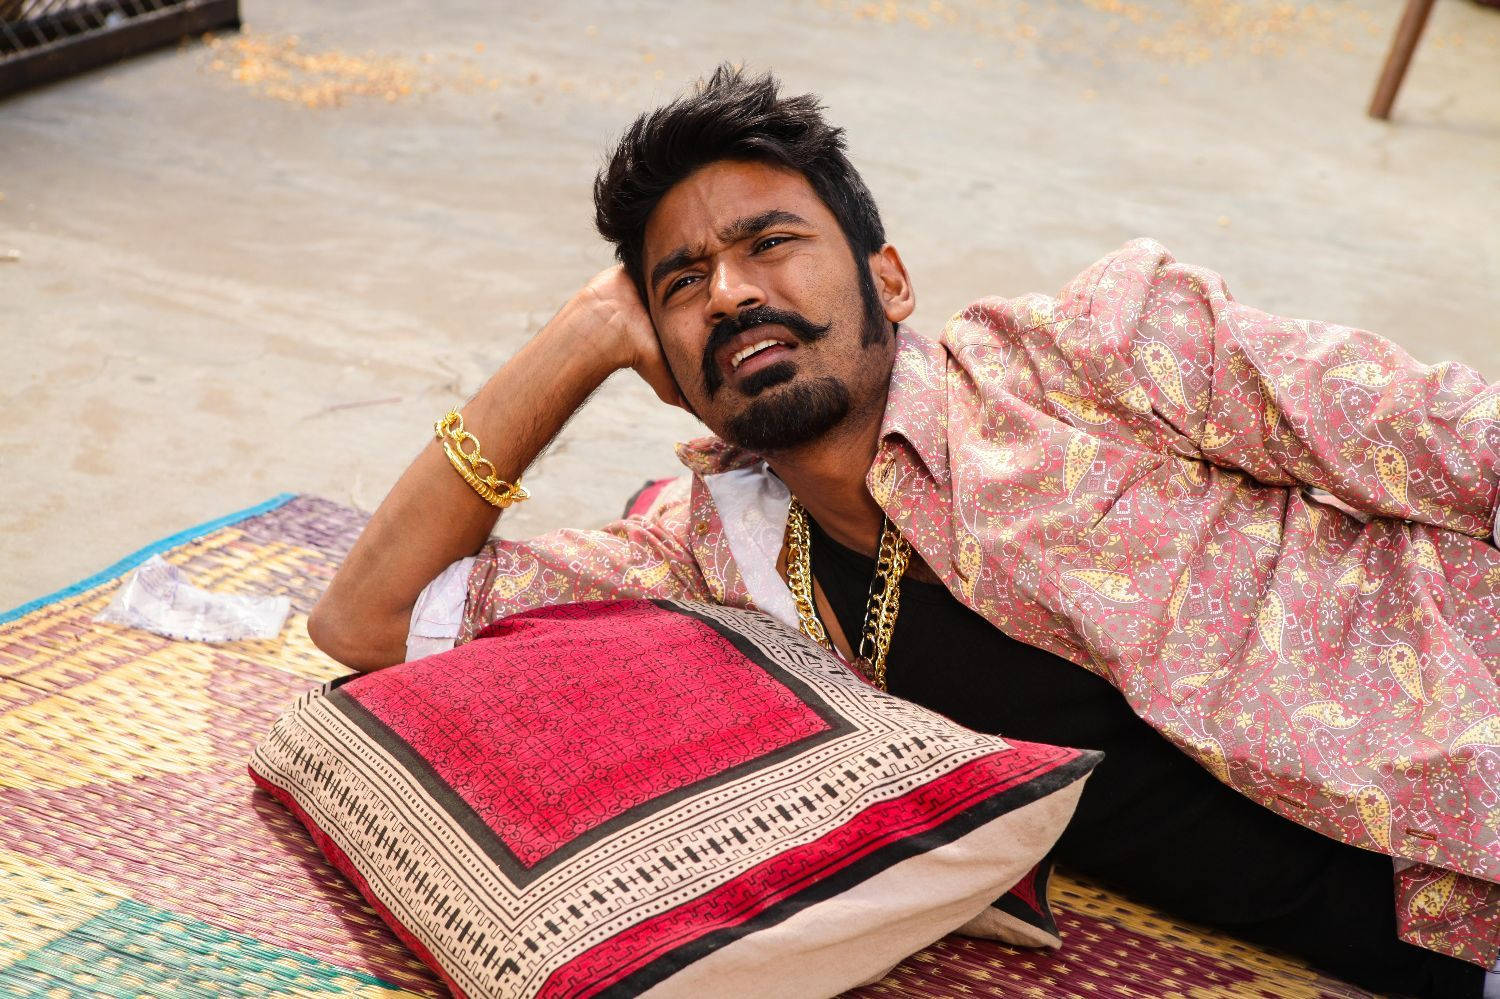 Nifty Dhanush Action Movie